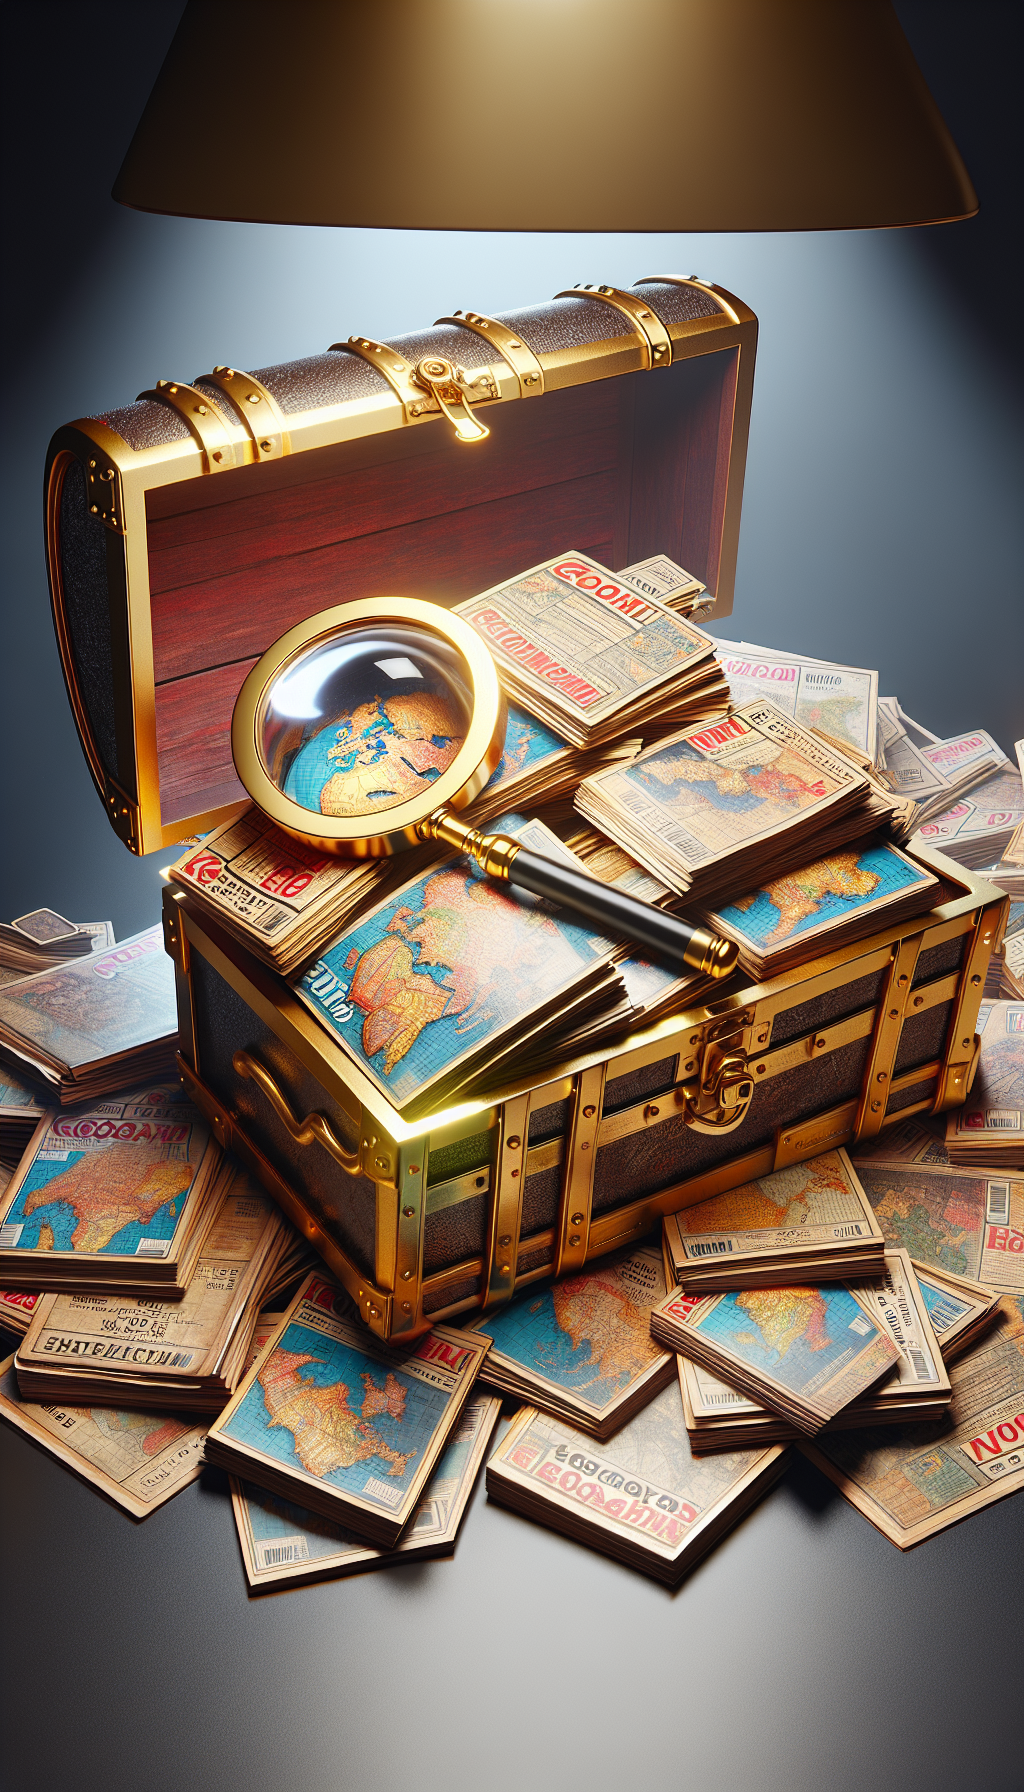 A treasure chest overflowing with pristine, golden-edged National Geographic magazines, each with a shimmering, holographic cover highlighting iconic issues, rests atop a stack of weathered, less lustrous editions. A magnifying glass hovers above, with rare, sought-after dates glowing beneath its lens, symbolizing the hunt for valuable copies amidst the collection's vast history.